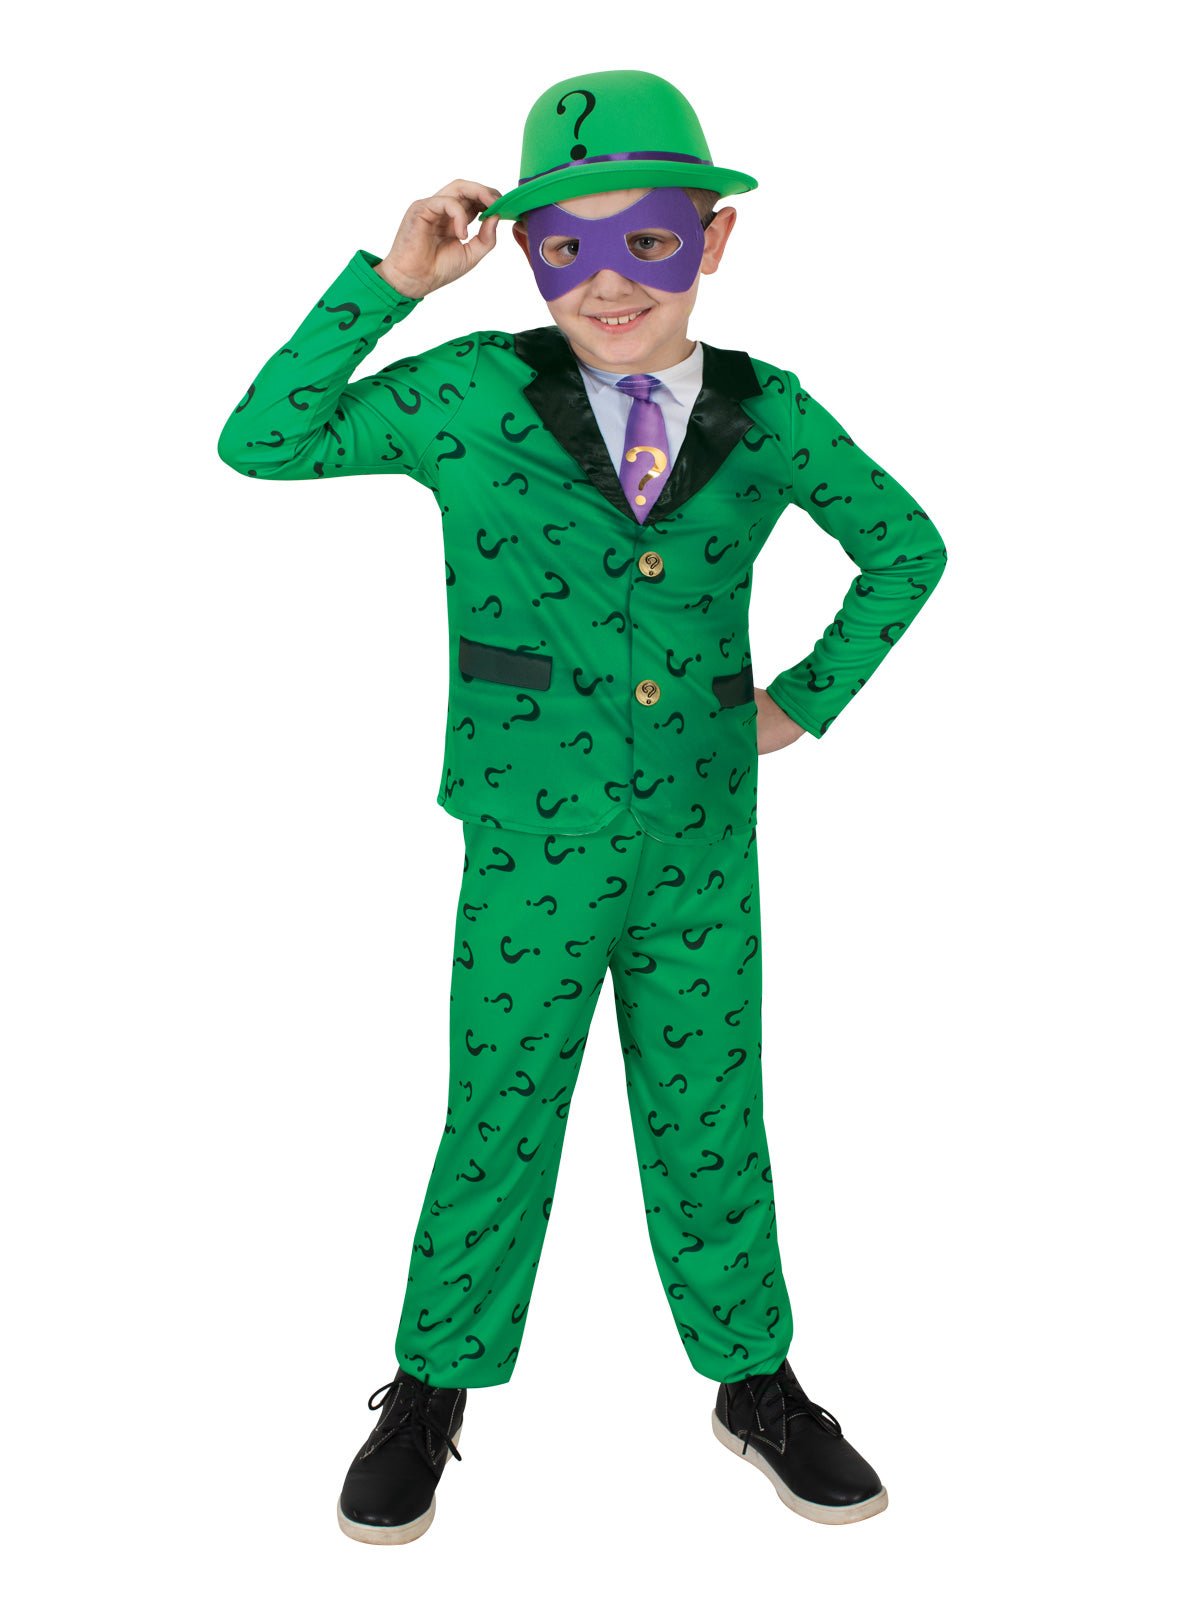 Official DC Comics Riddler Outfit for Kids